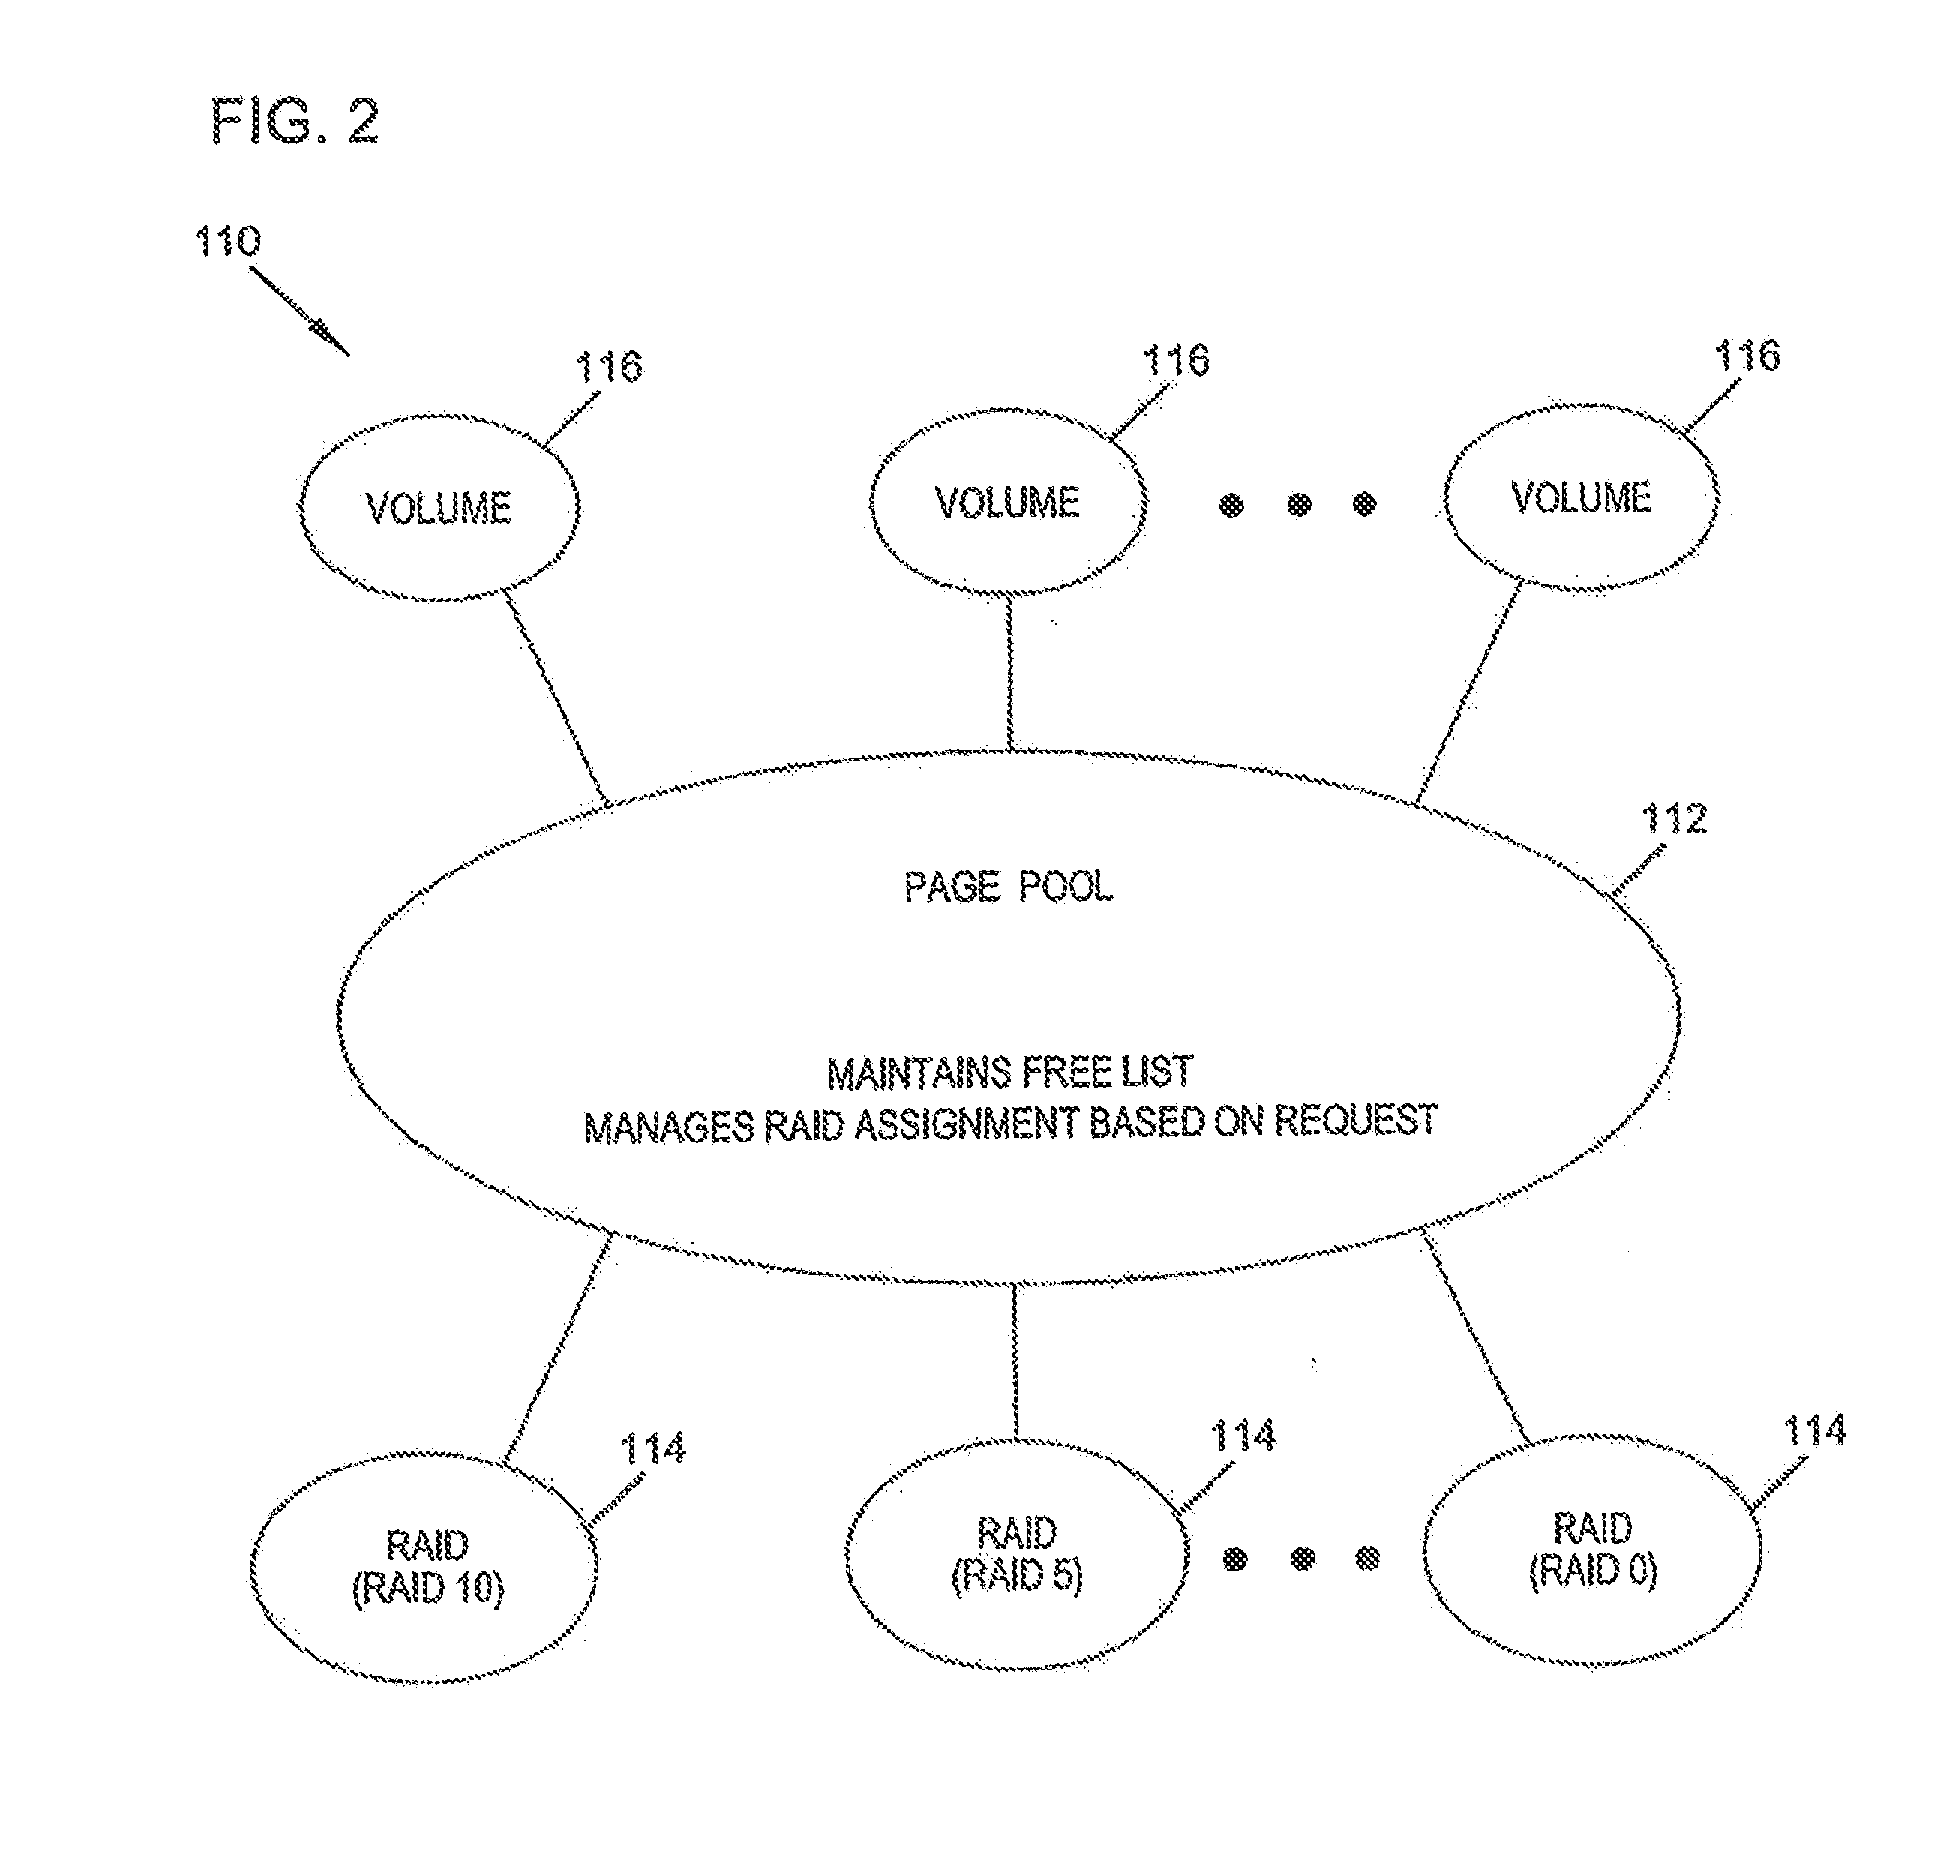 System and method for transferring data between different raid data storage types for current data and replay data